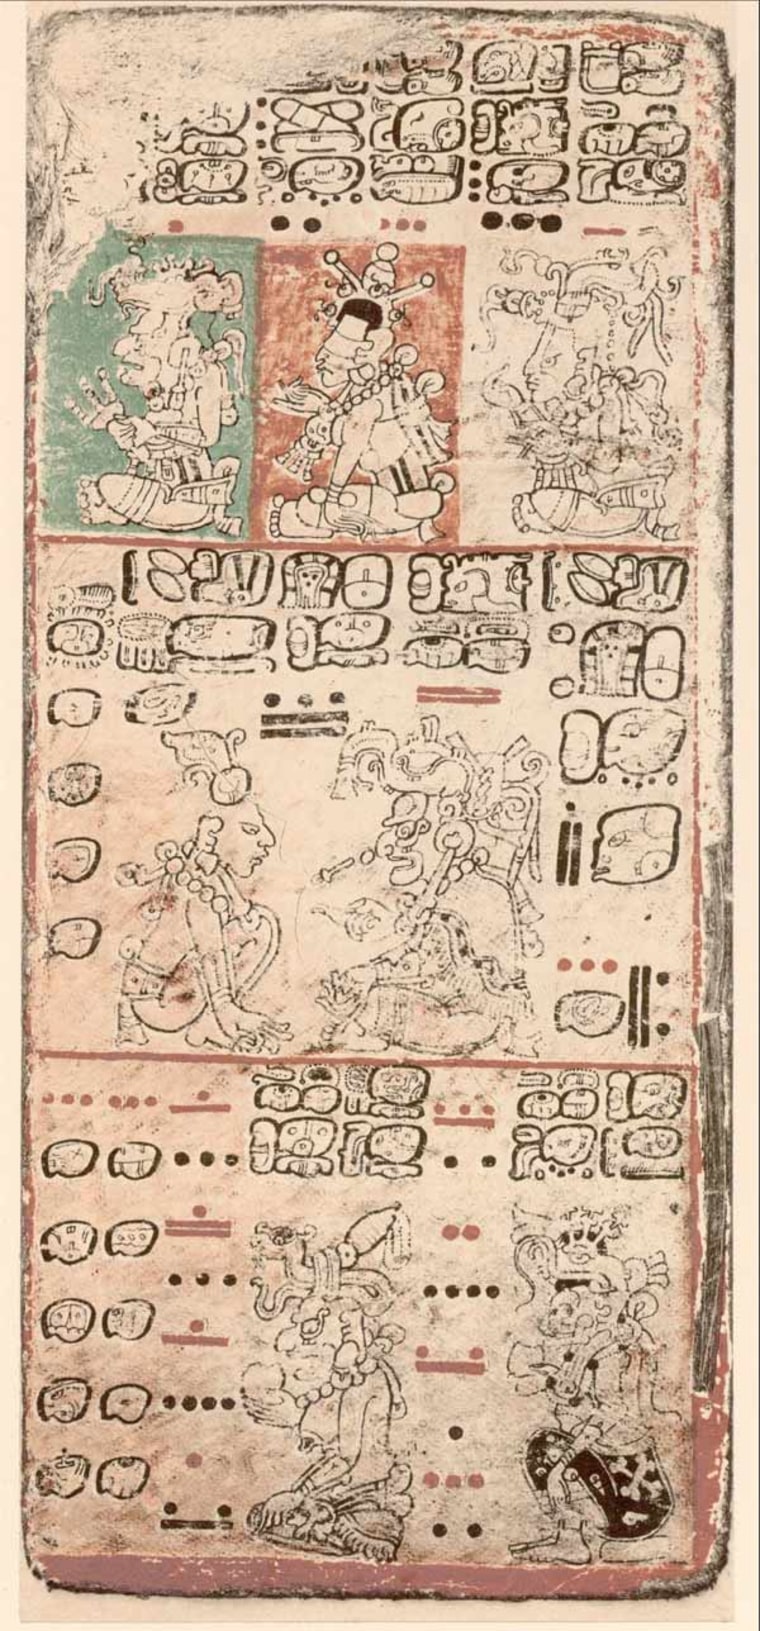 Anthropologists decoded early Mayan hieroglyphics from four codices, finding the Maya accurately predicted modern-day astronomical phenomena. Shown here, an image from the so-called Dresden Codex.